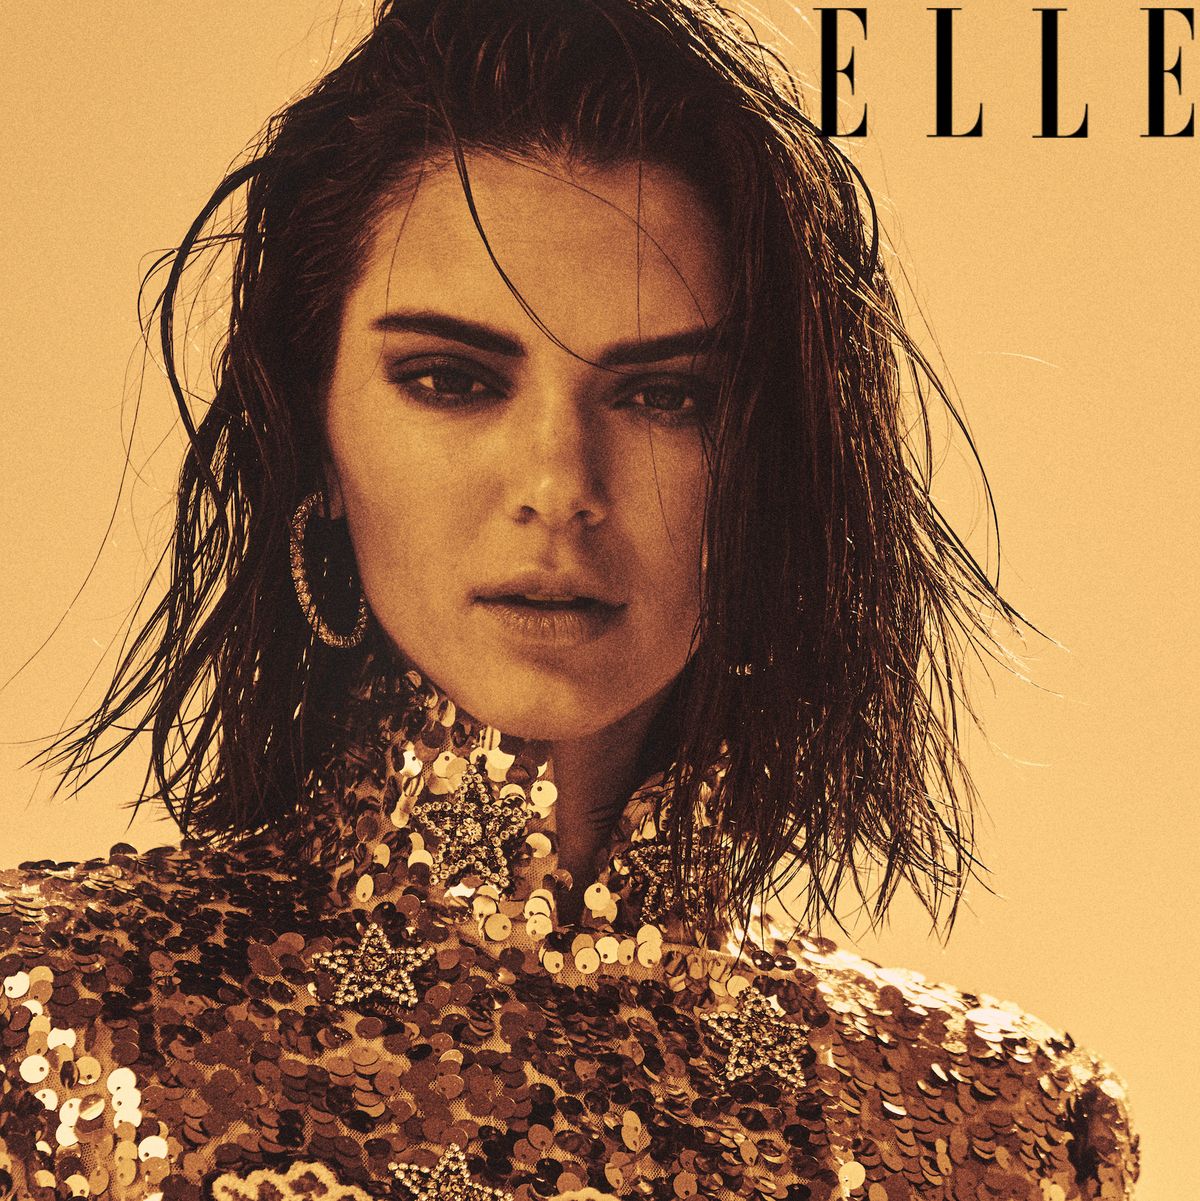 Kendall Jenner Stars in the Cover Story of Elle Magazine June 2018 Issue